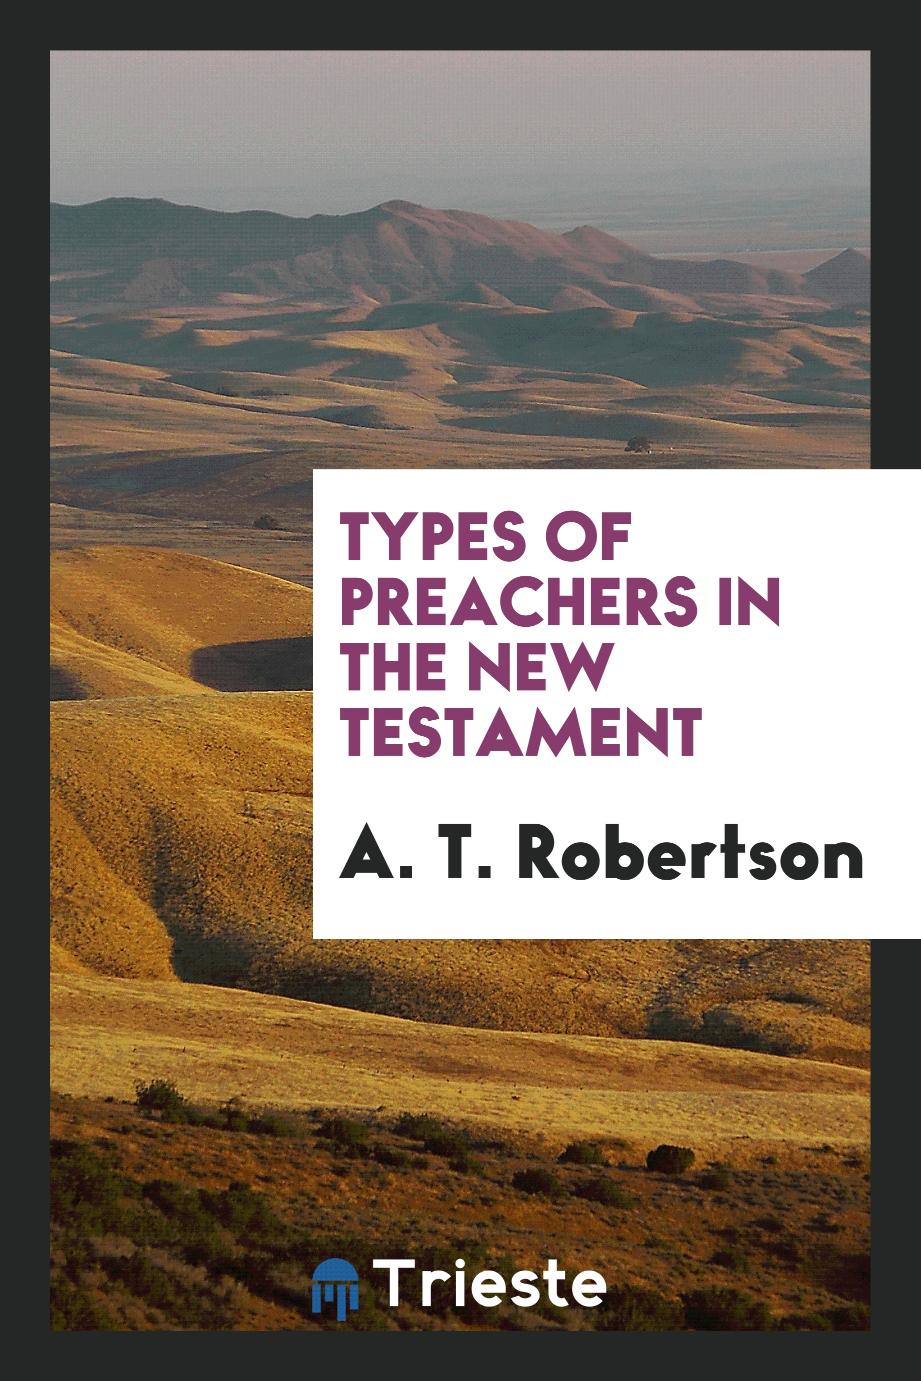 Types of preachers in the New Testament